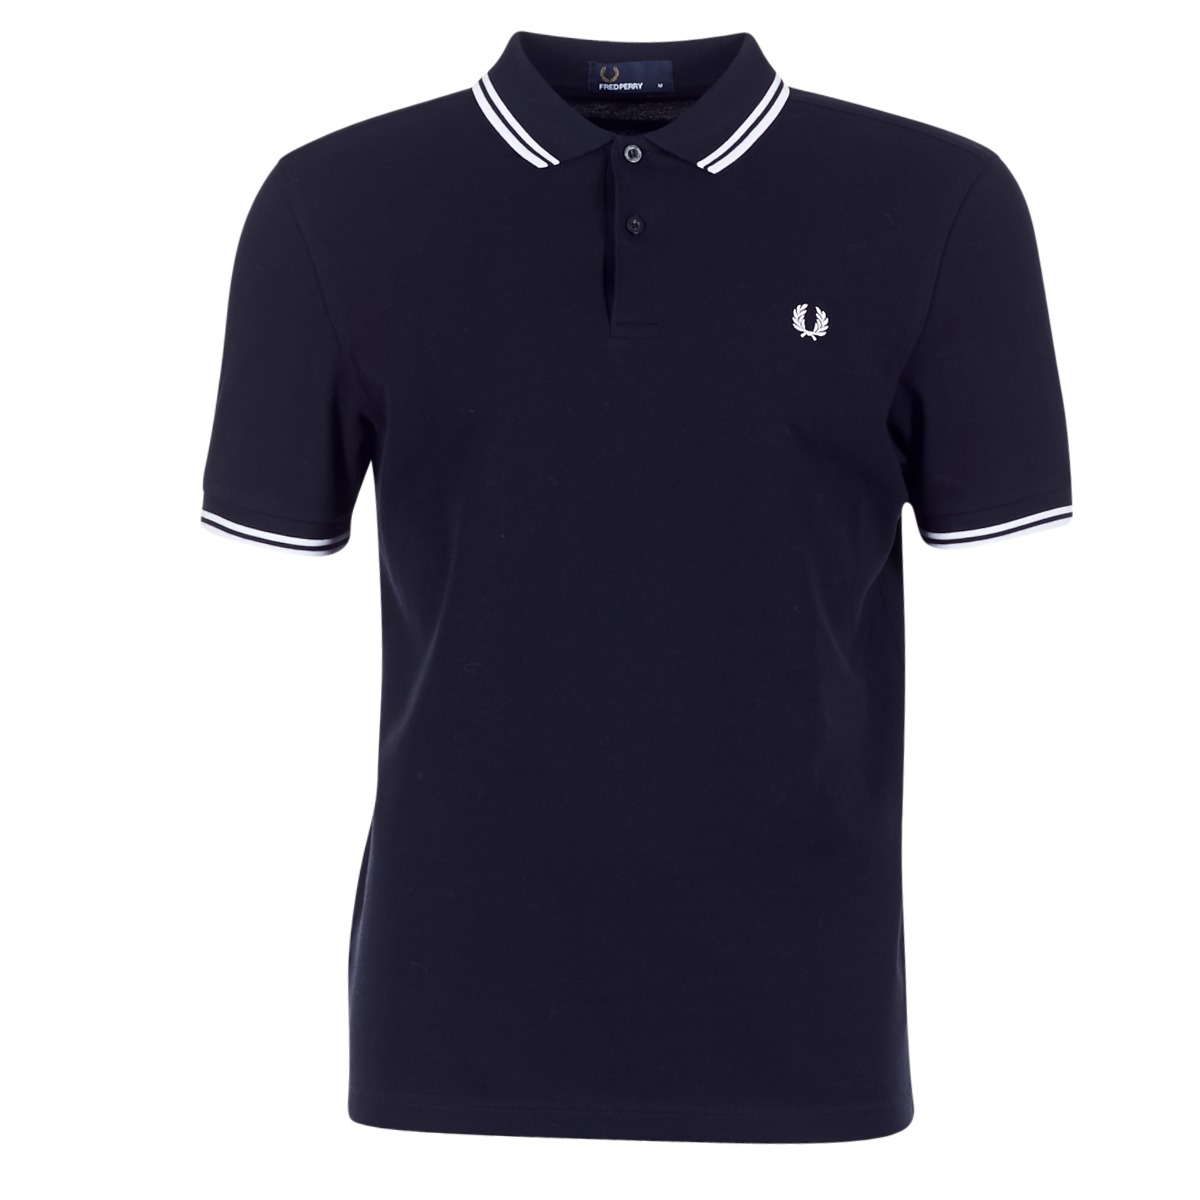 fred perry  slim fit twin tipped  men's polo shirt in marine